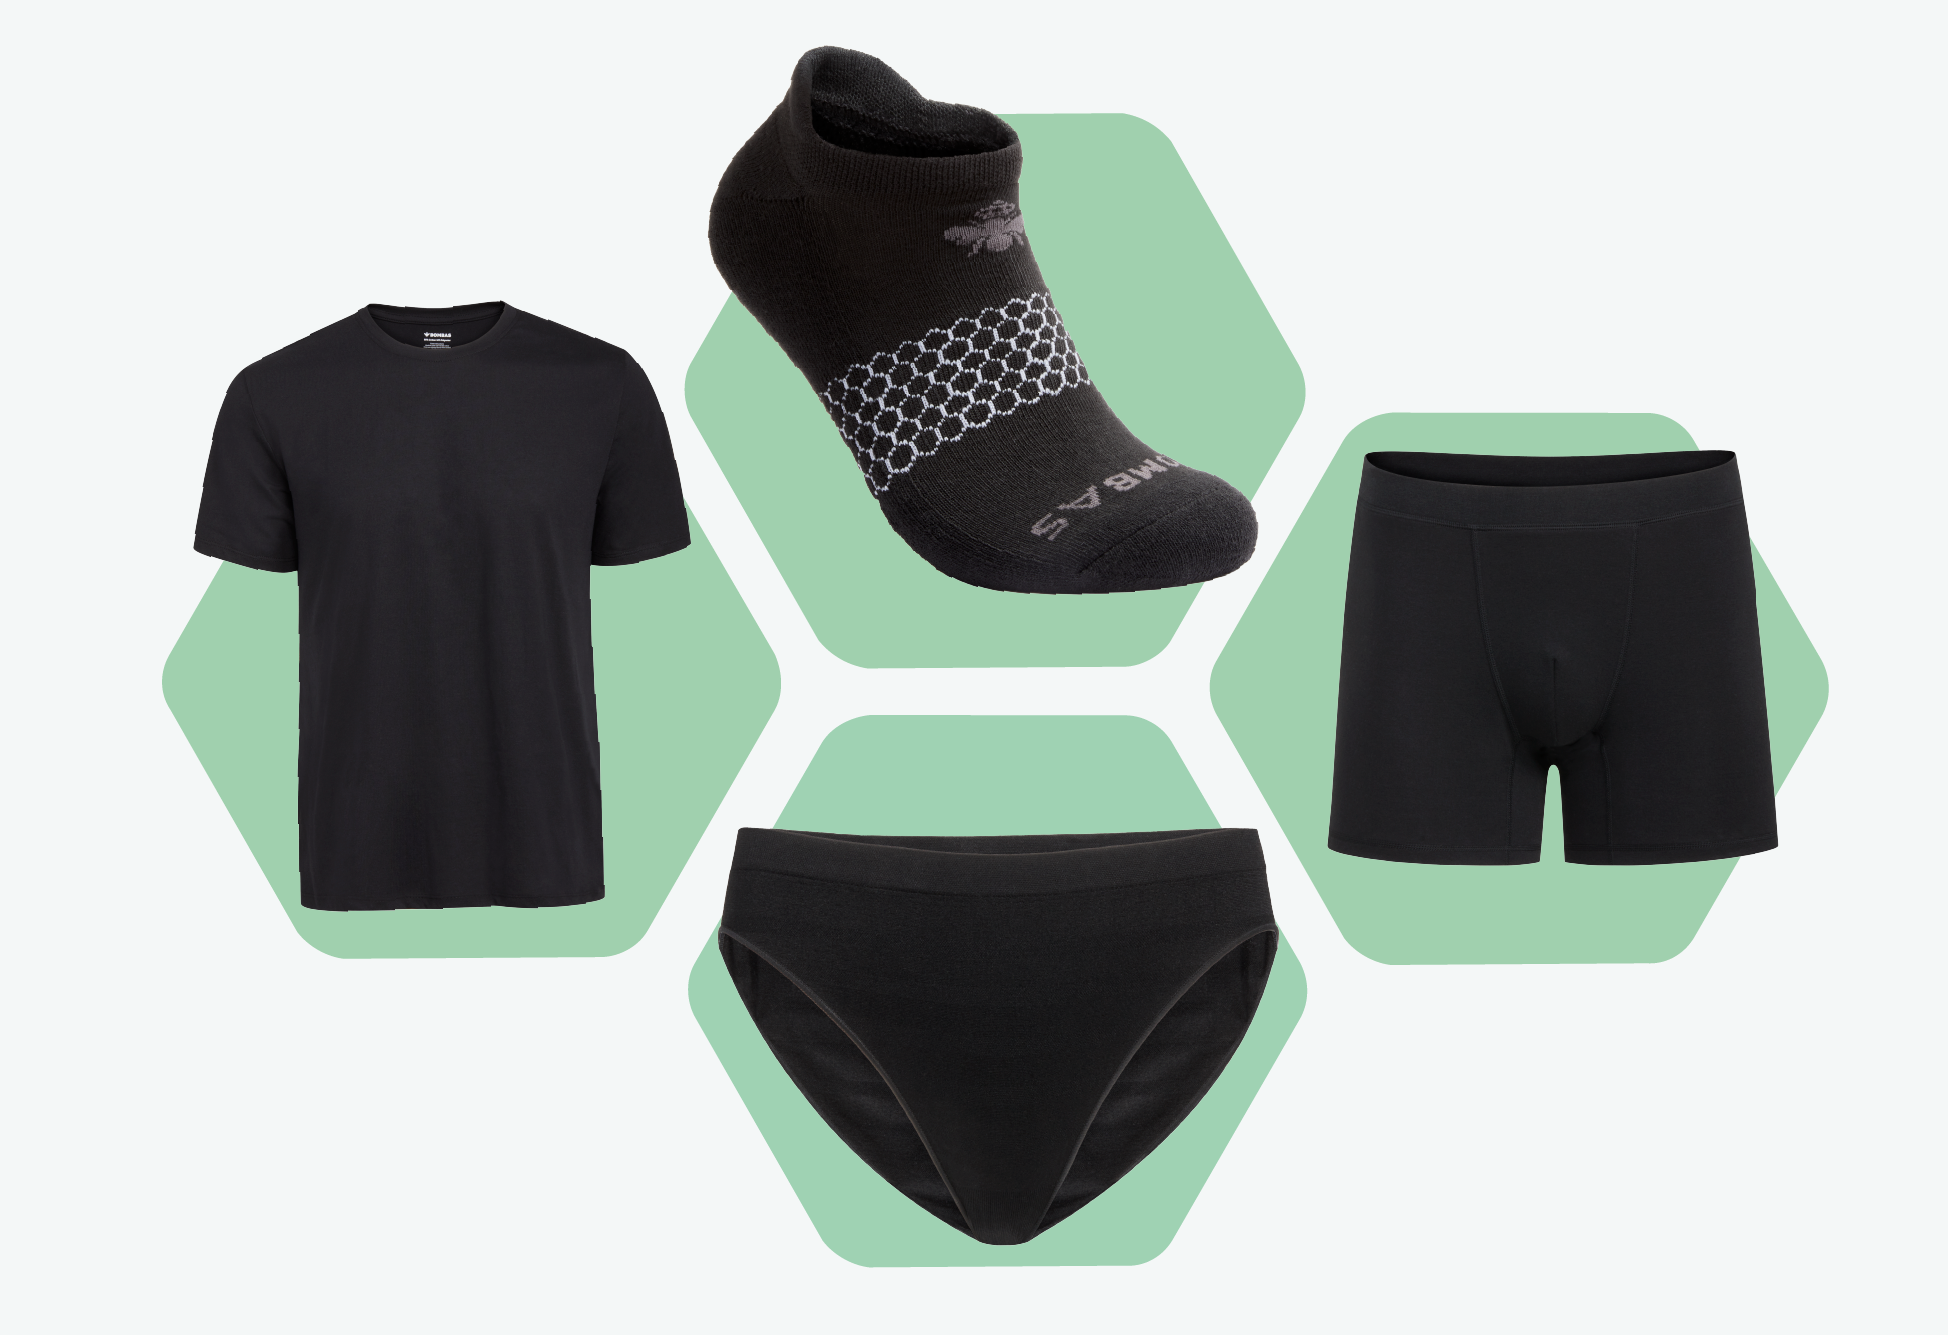 Bombas - Since the beginning, we've donated a pair socks for every pair  purchased. We also donate other essential clothing items, like t-shirts,  and most recently, underwear. So every time you purchase